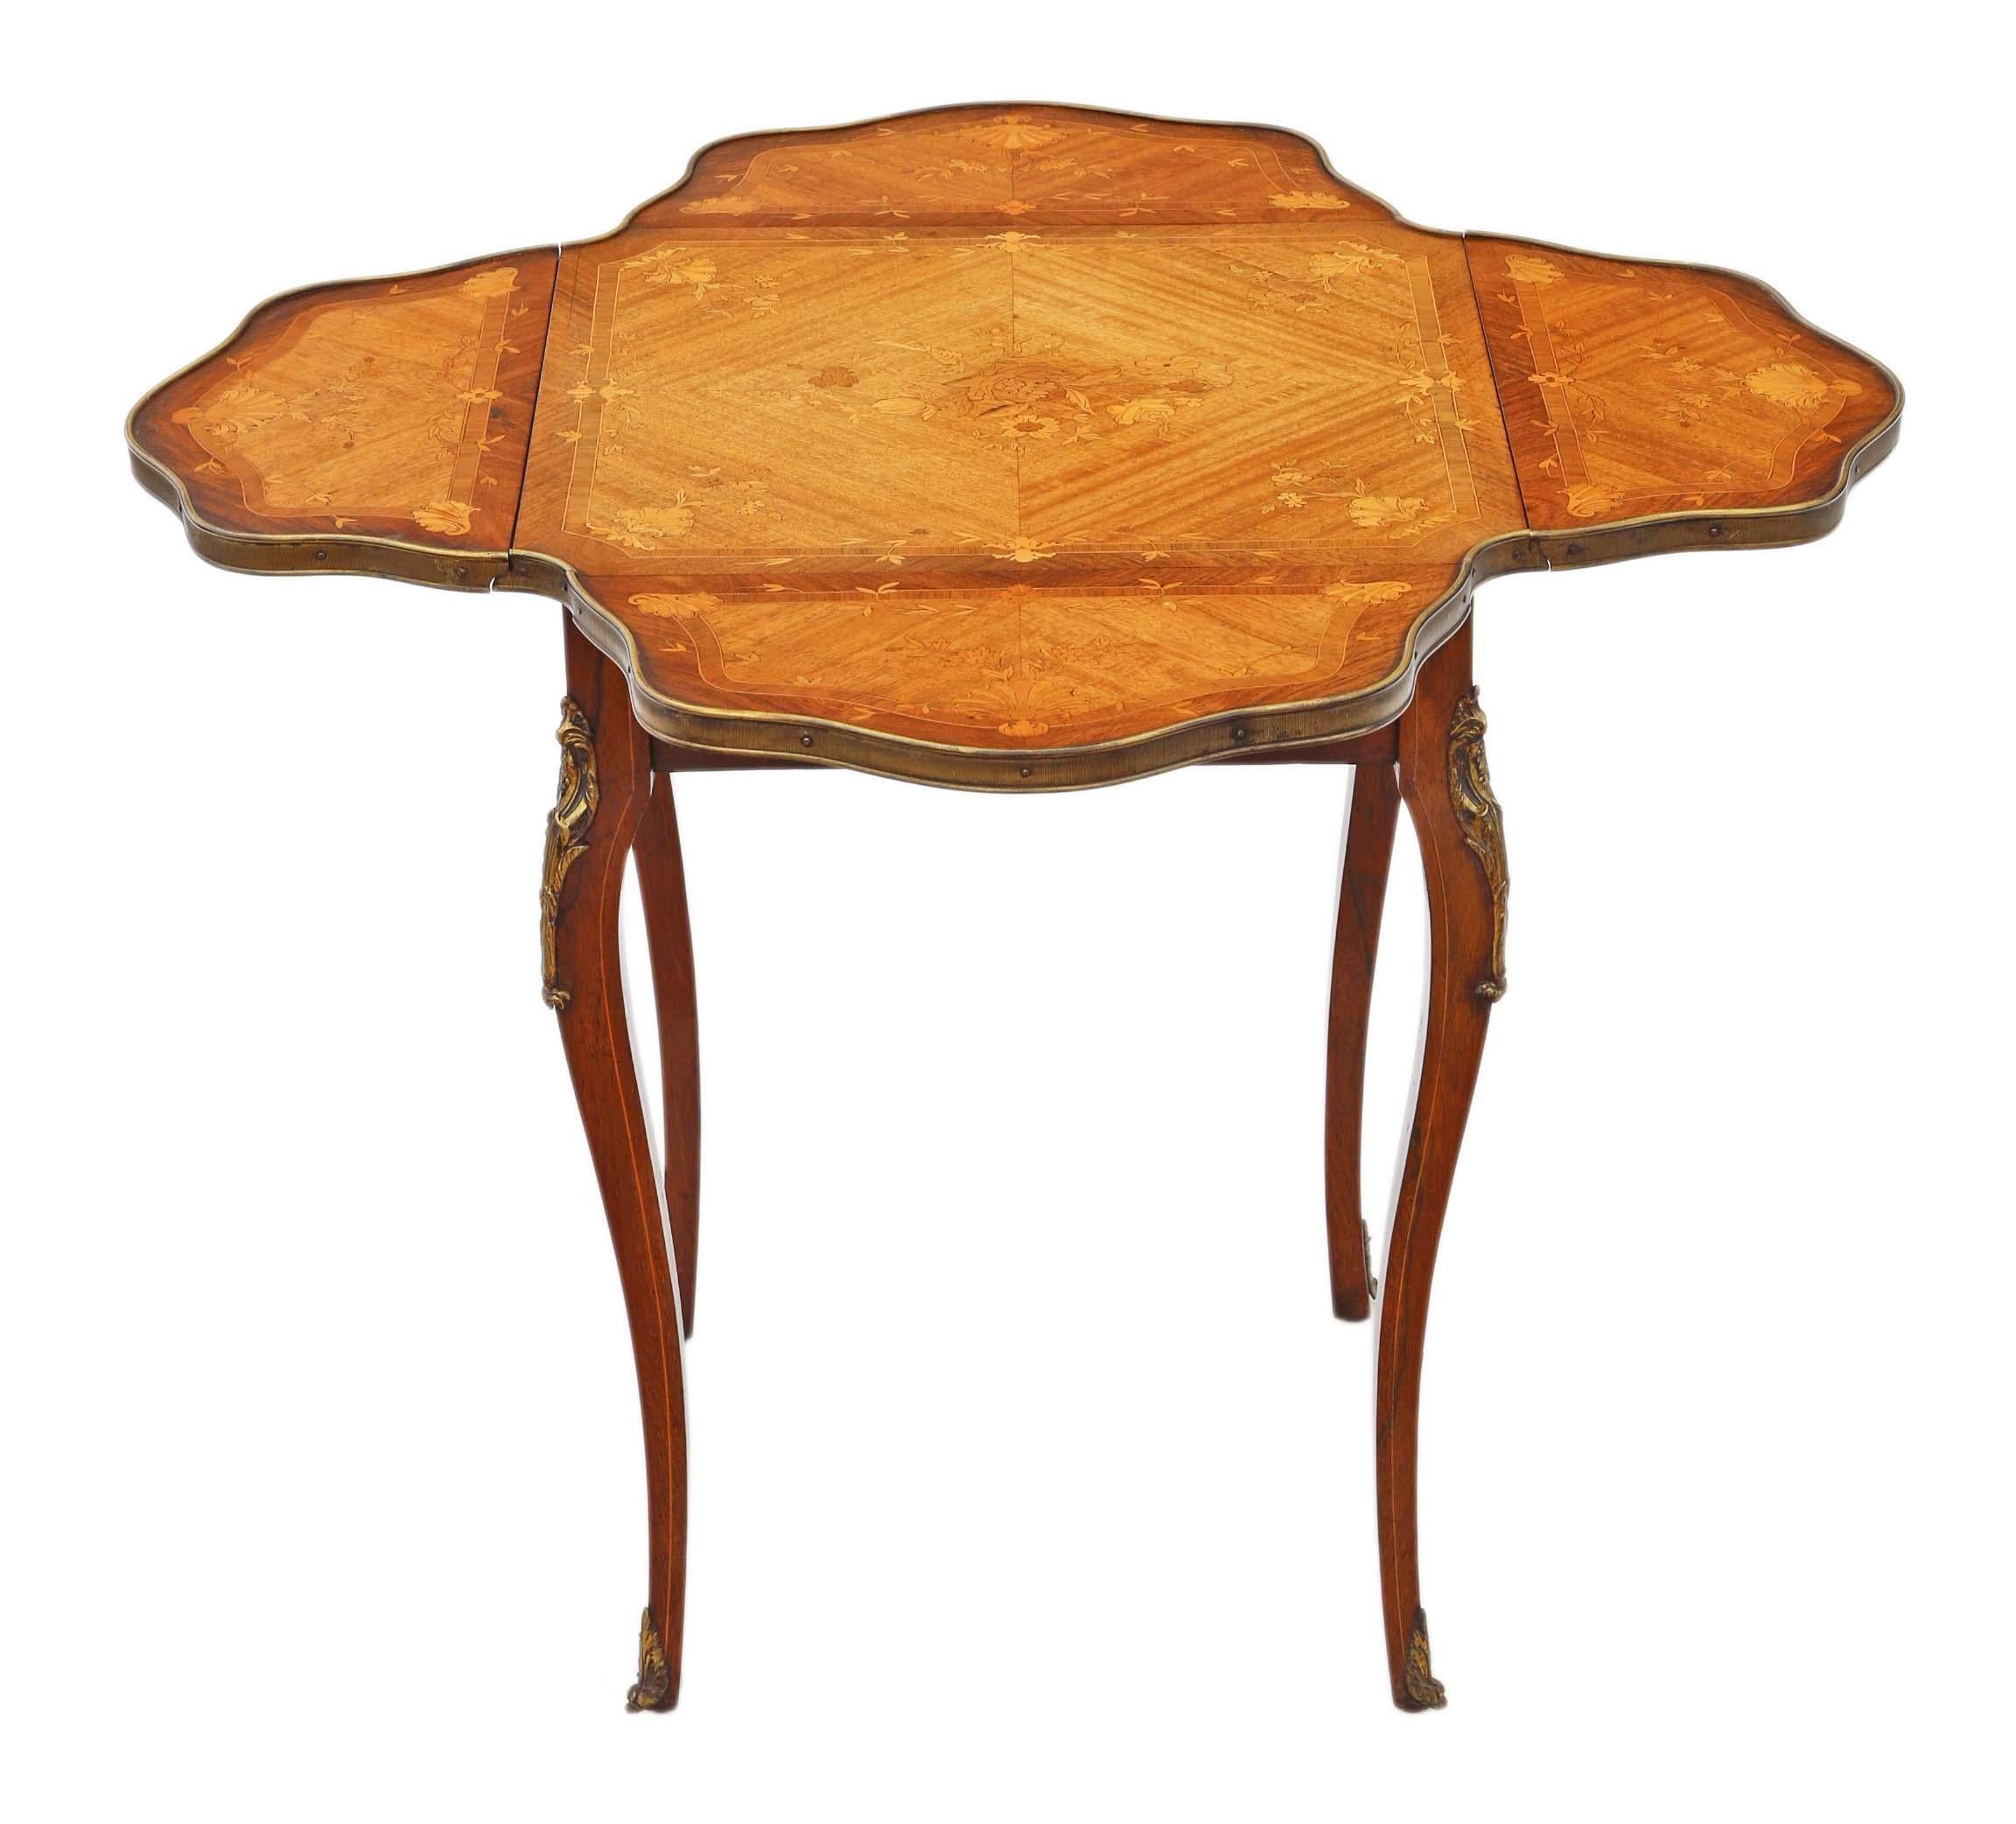 Folding marquetry centre, side or occasional table, circa 1900-1920
This is a lovely top quality table, that is full of age, charm and character. Brass edging and mounts.
Rare and attractive quality antique find.
The table has no loose joints and